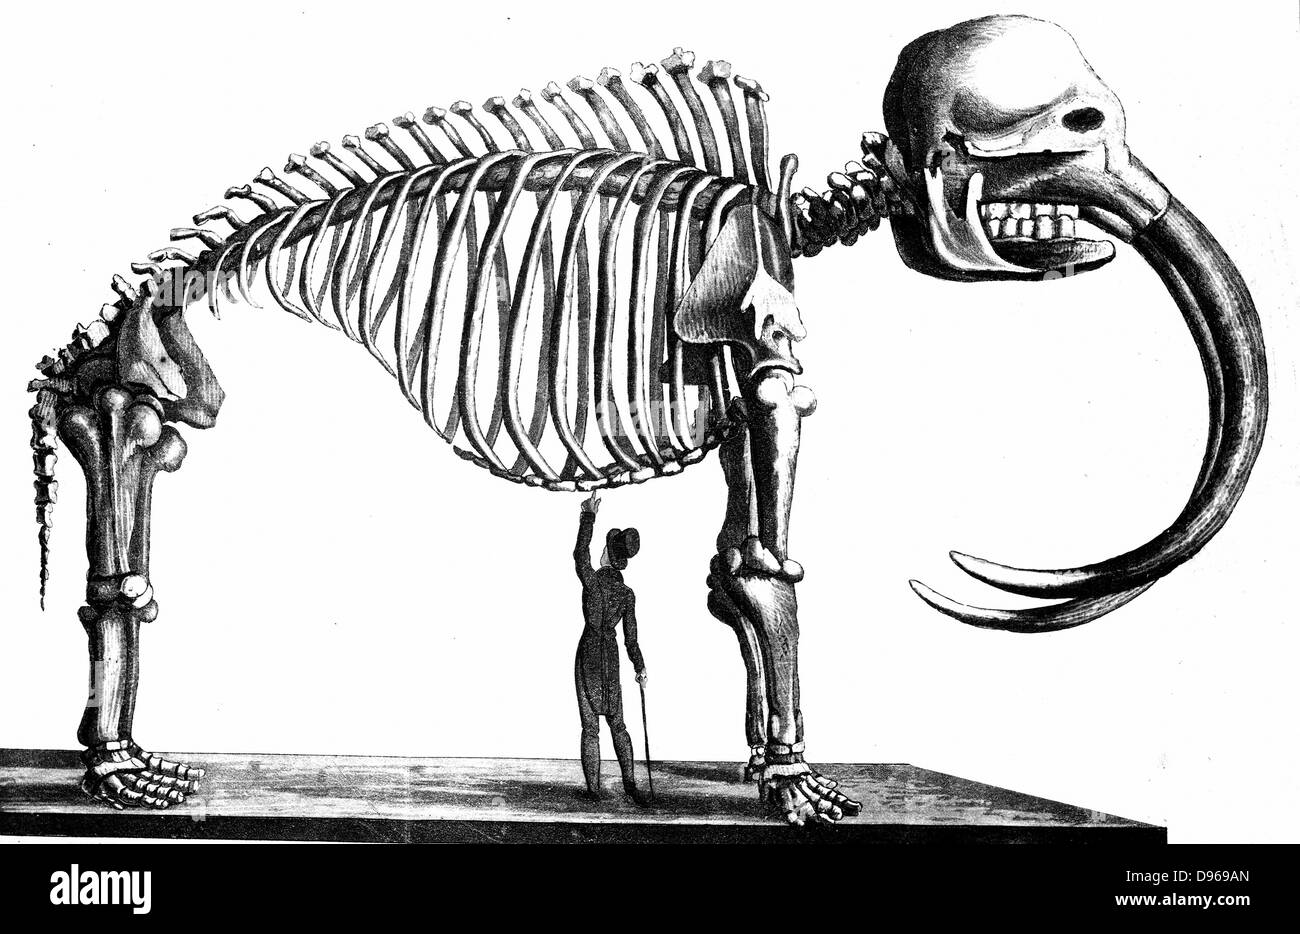 Skeleton of Mammoth discovered in 1817 by Dr Mitchell of New York at Goschen, Orange County and later assembled in the Philadelphia Museum.  From Simeon Shaw 'Nature Displayed', London,  1823. Lithograph Stock Photo